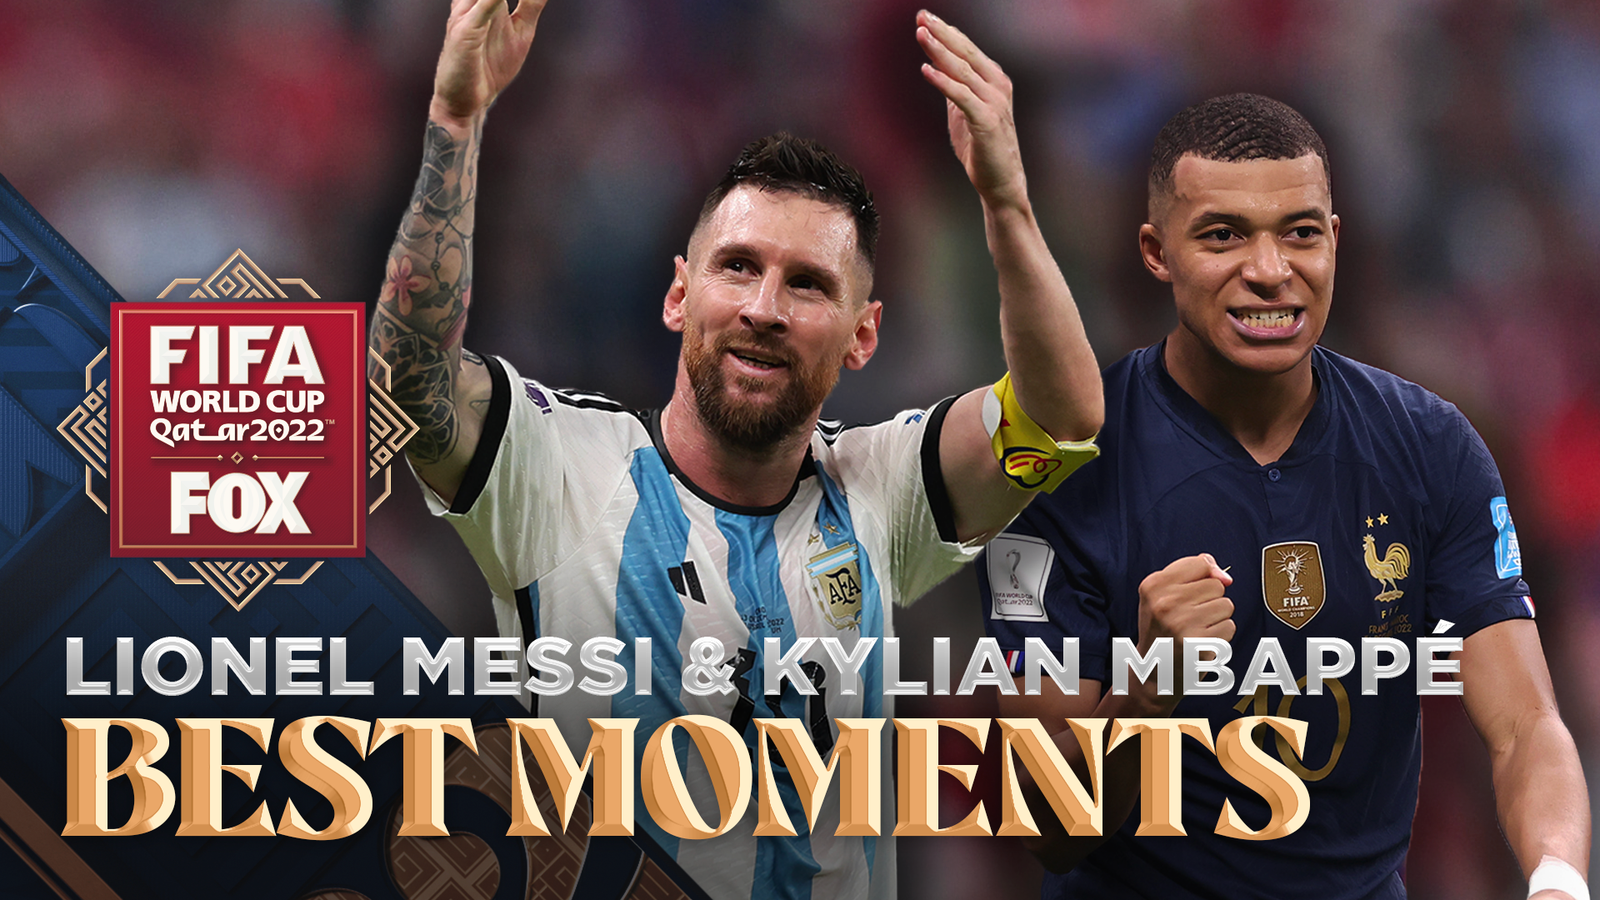 The BEST moments of Lionel Messi and Kylian Mbappé